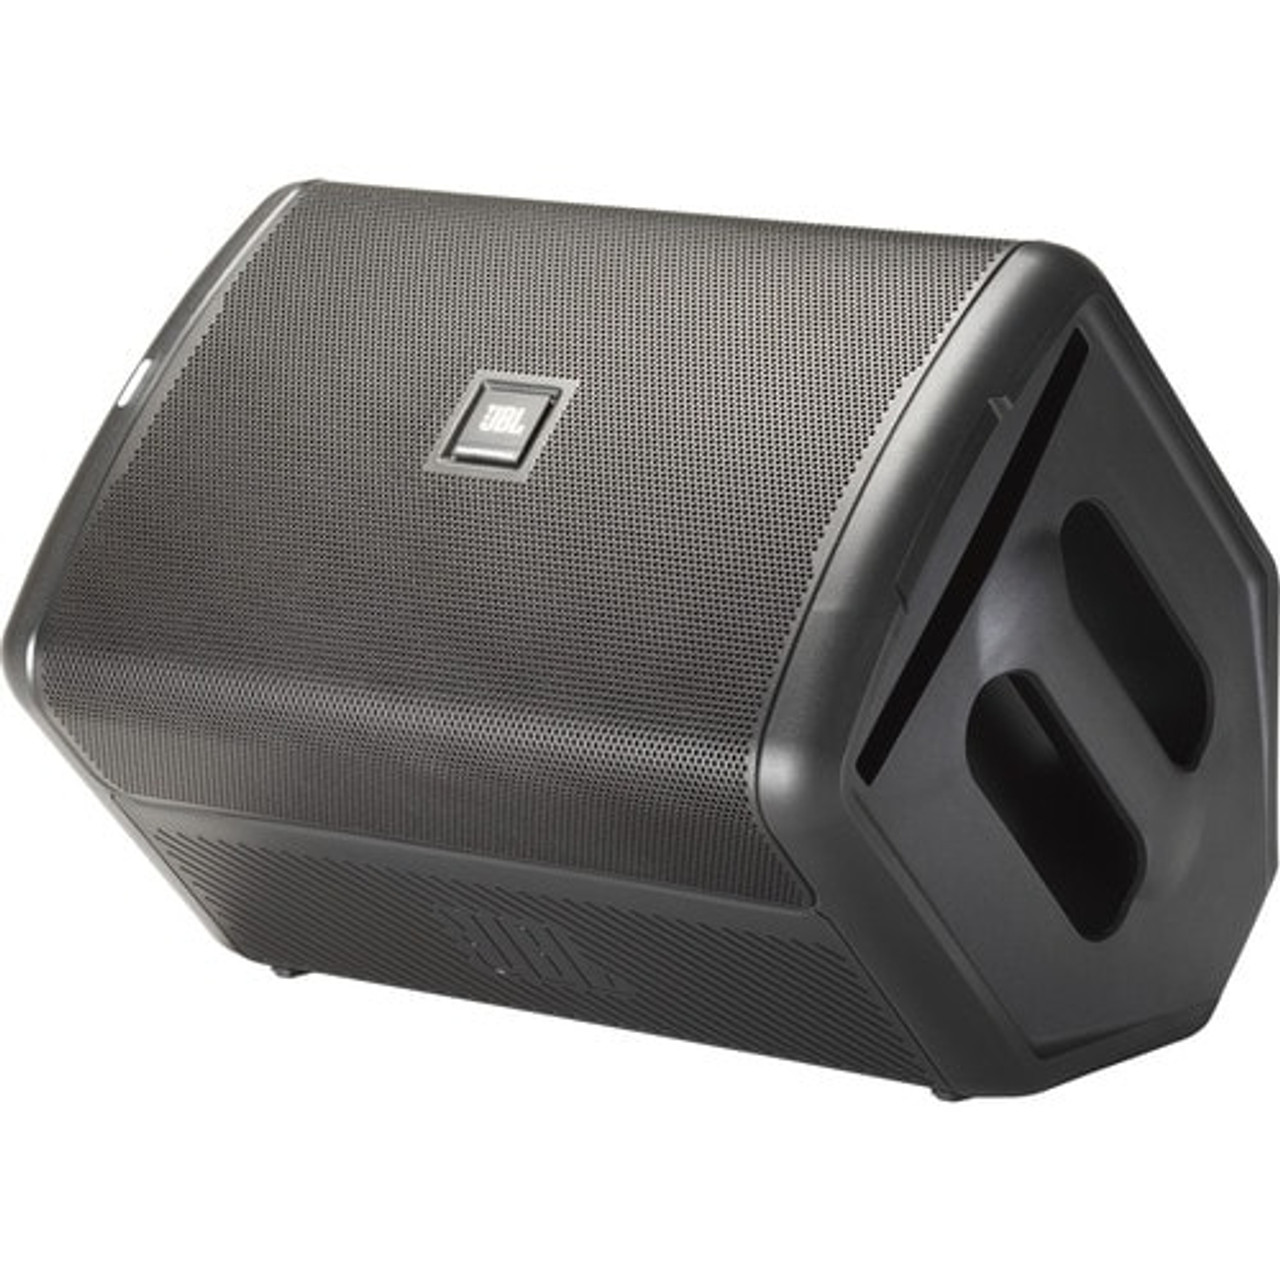 JBL EON One Compact PA Speaker with Rechargeable Battery